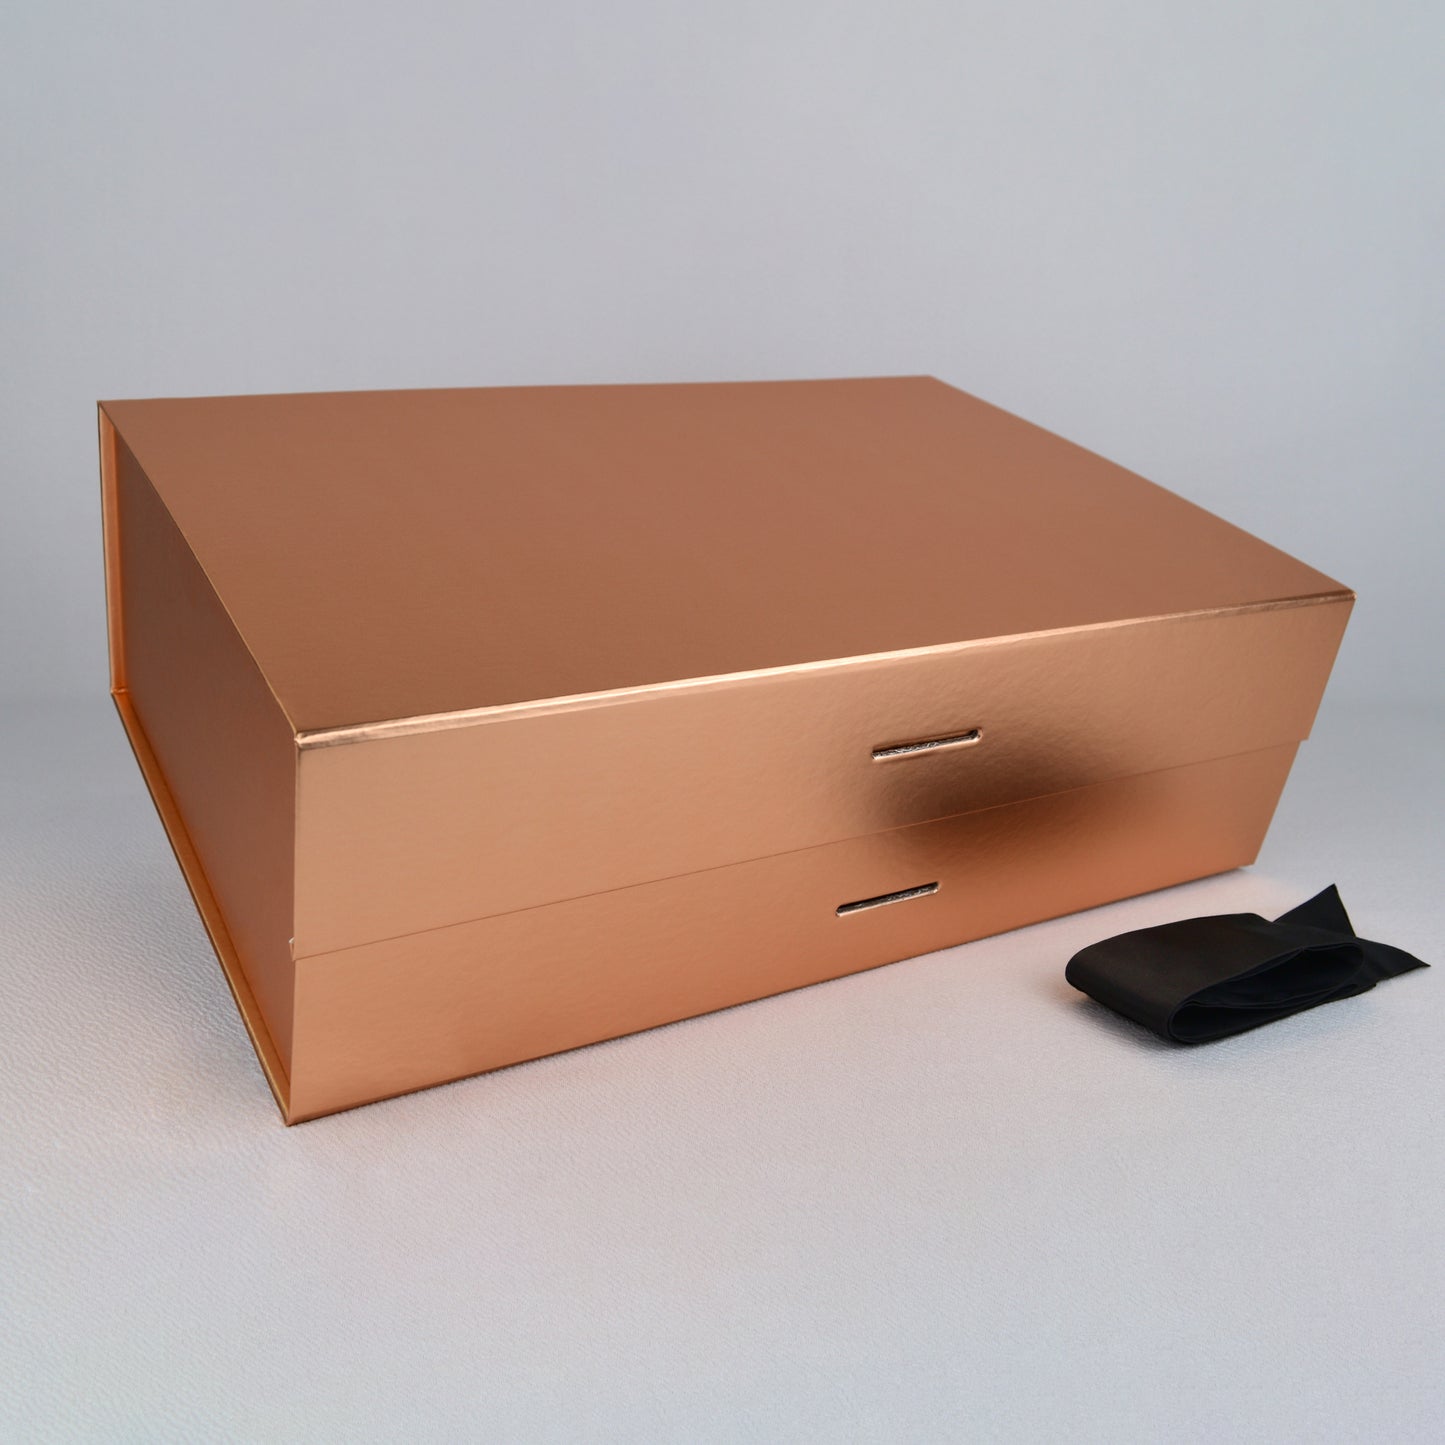 EXTRA-LARGE Premium Gift Box with Removable Ribbon & Magnetic Closure (14" x 9.5" x 4.5")